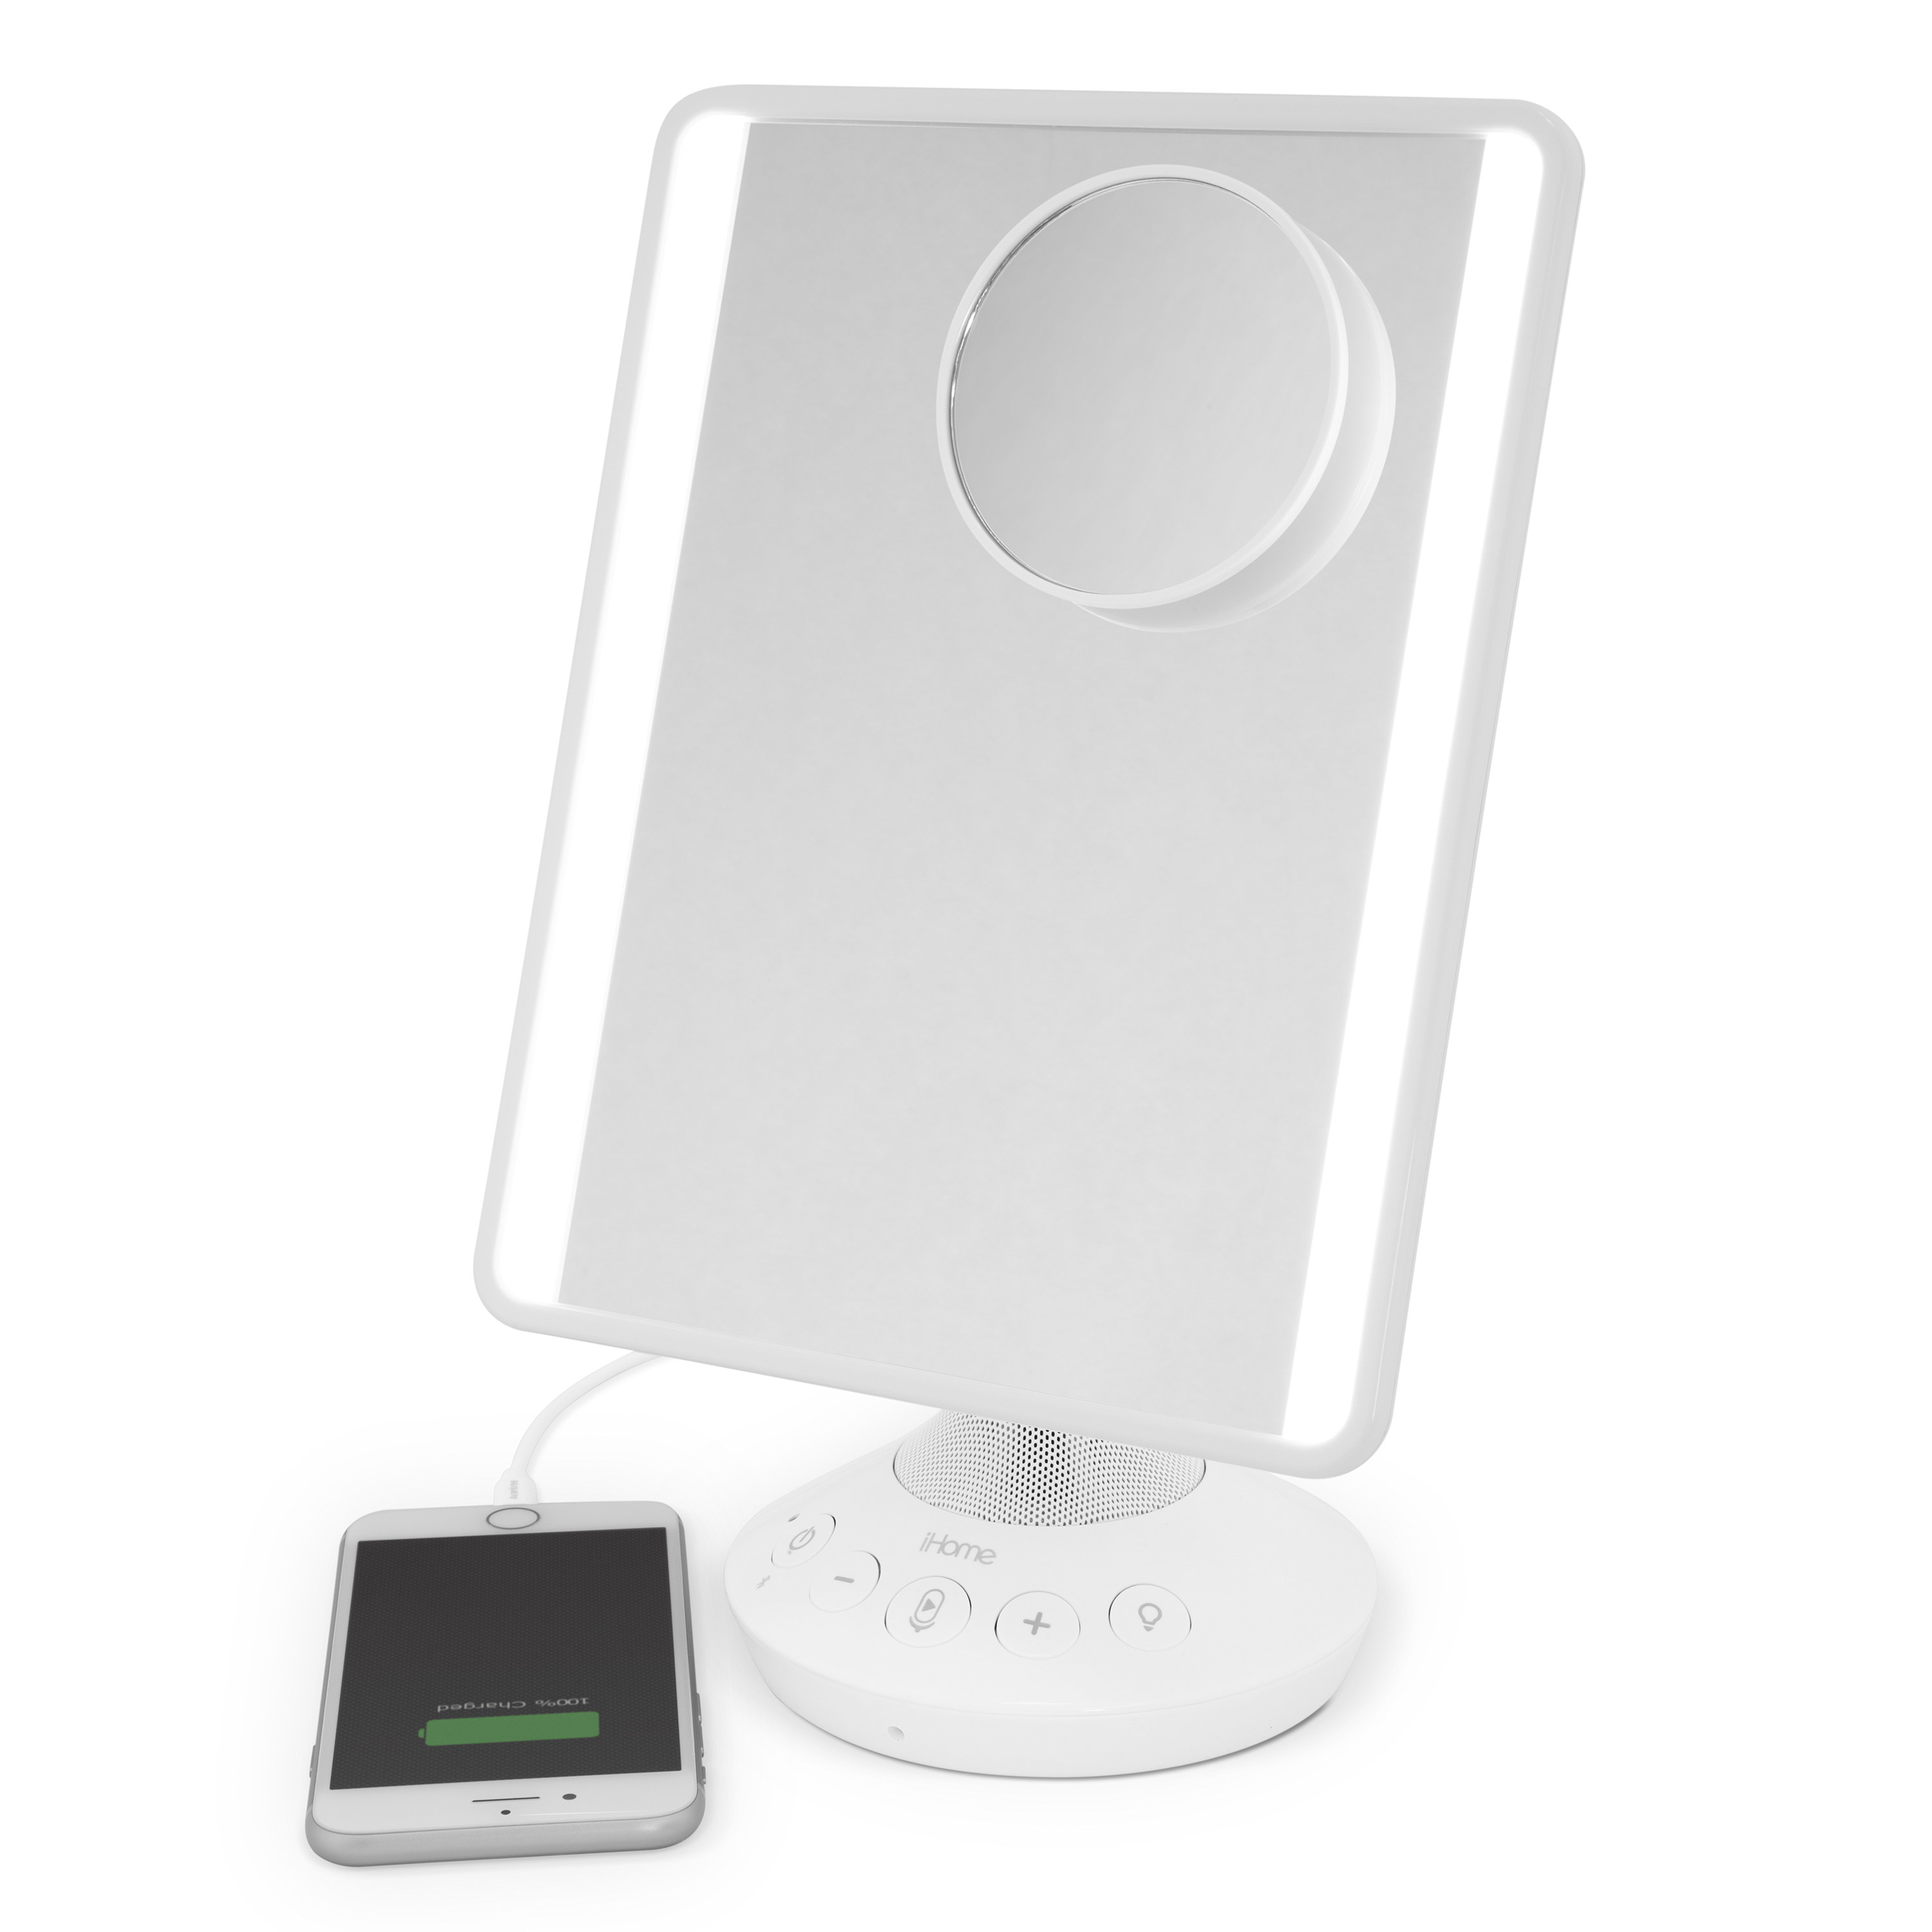 The iHome mirror